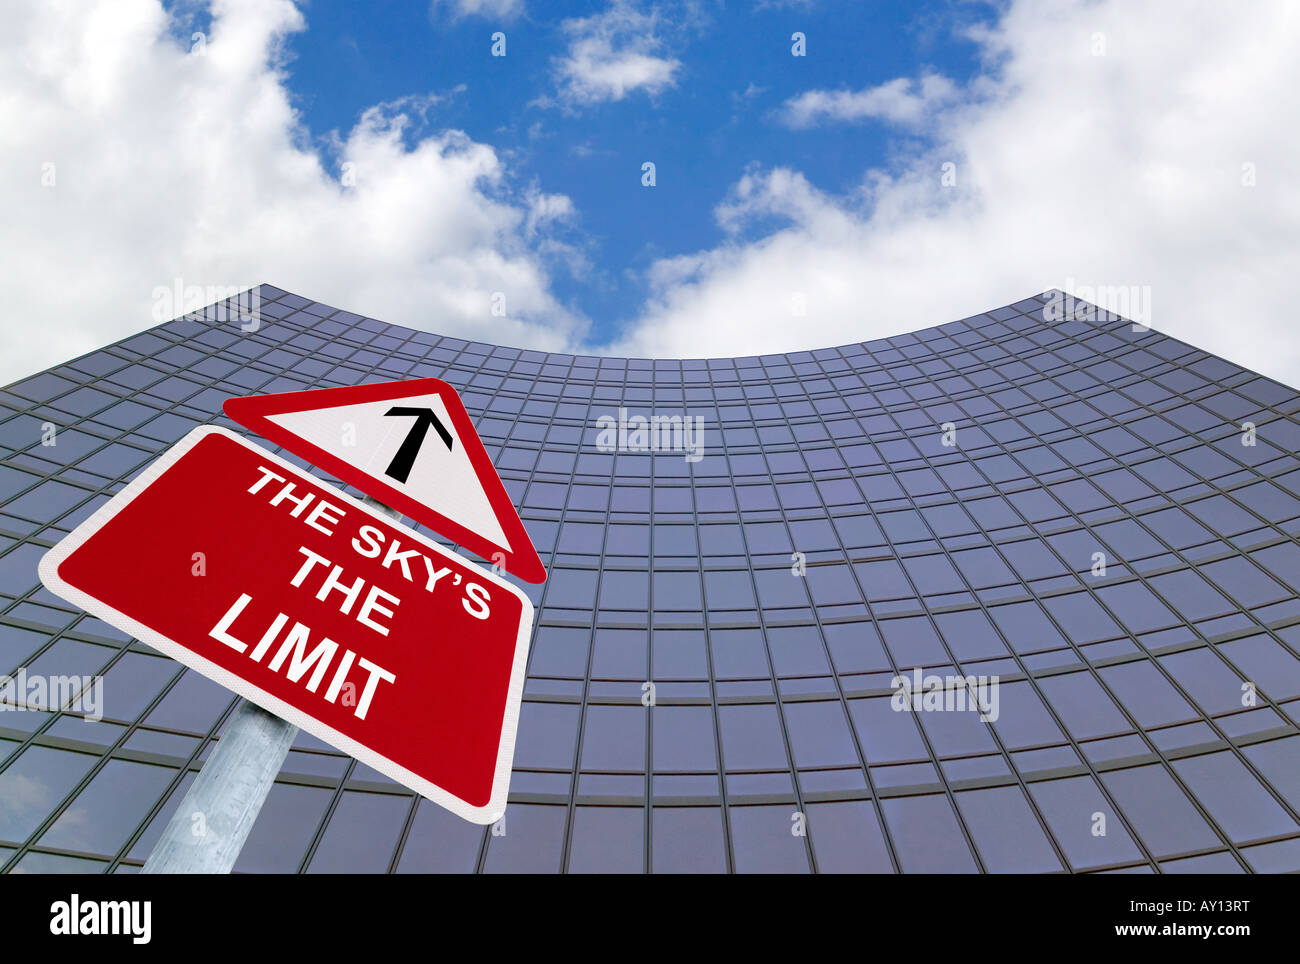 A signpost with The Skys the Limit outside a modern glass office building Stock Photo